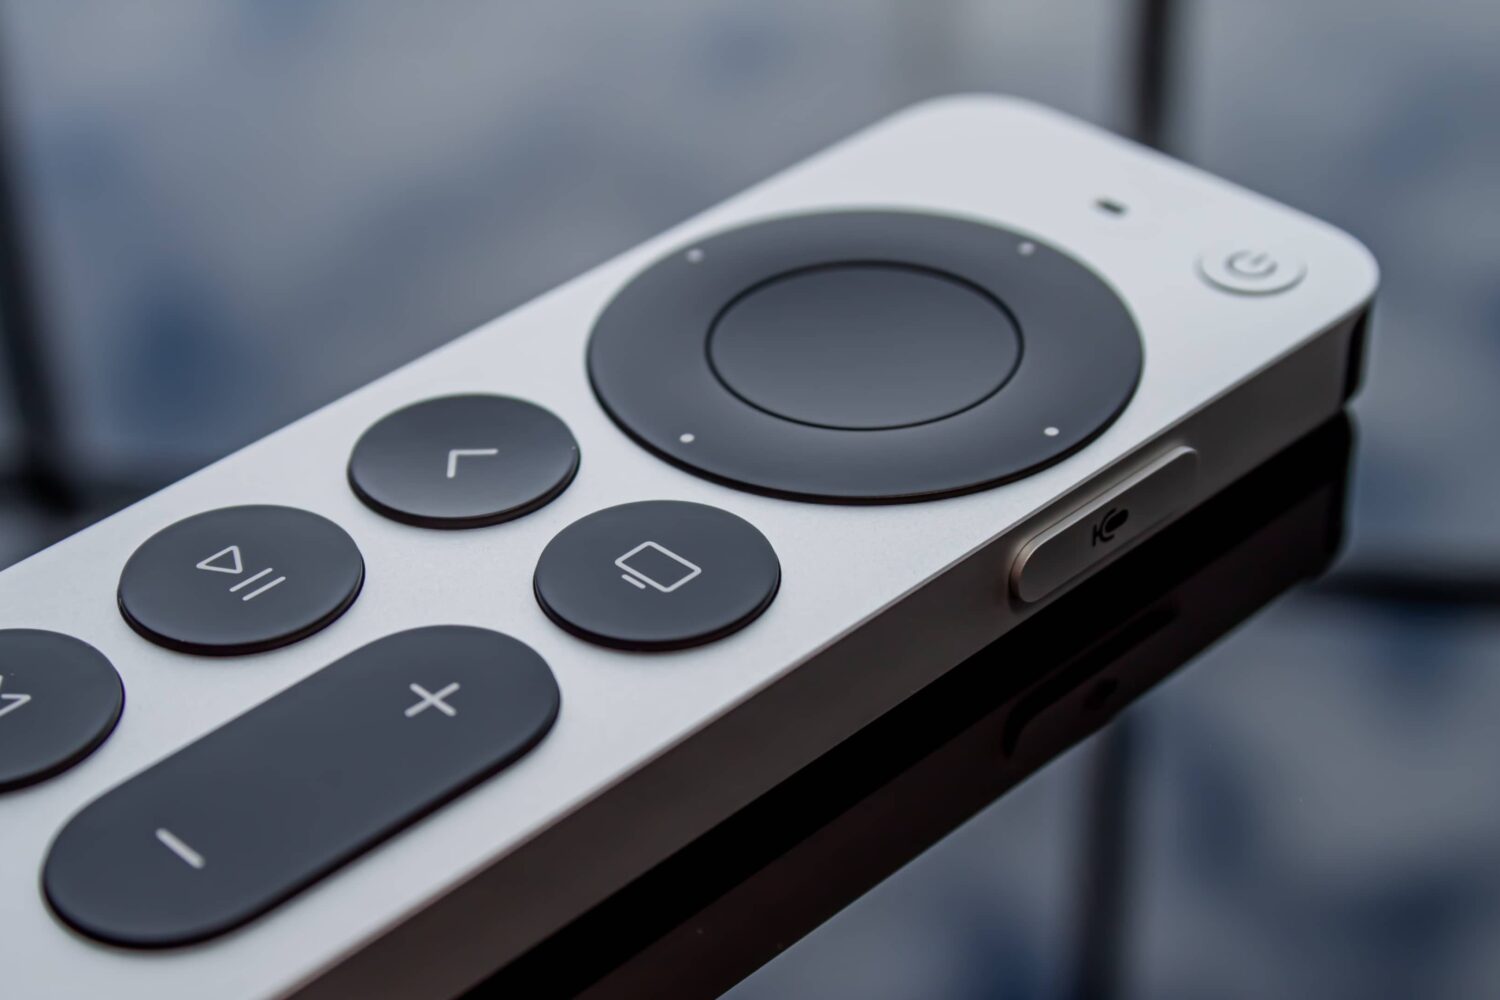 A redesigned Siri-powered remote for the Apple TV streaming box is shown laid flat on its back on a glass table in this close-up photograph.